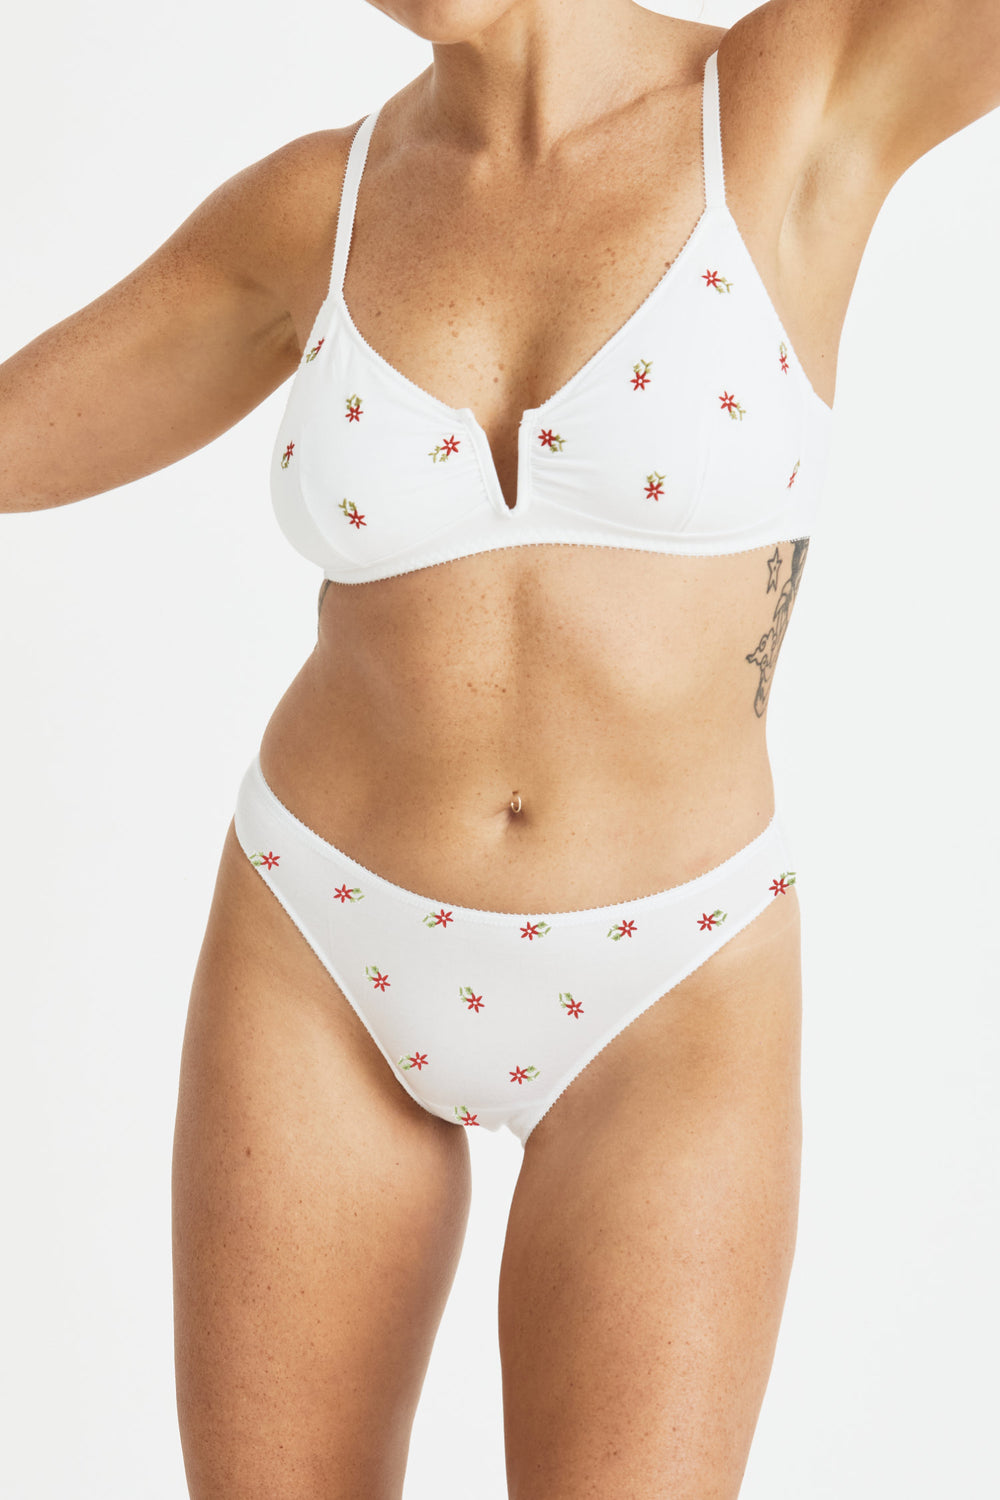 Videris Lingerie Angela soft cup bra in embroidered white TENCEL™ features a triangle shaped cup and front gathering detail